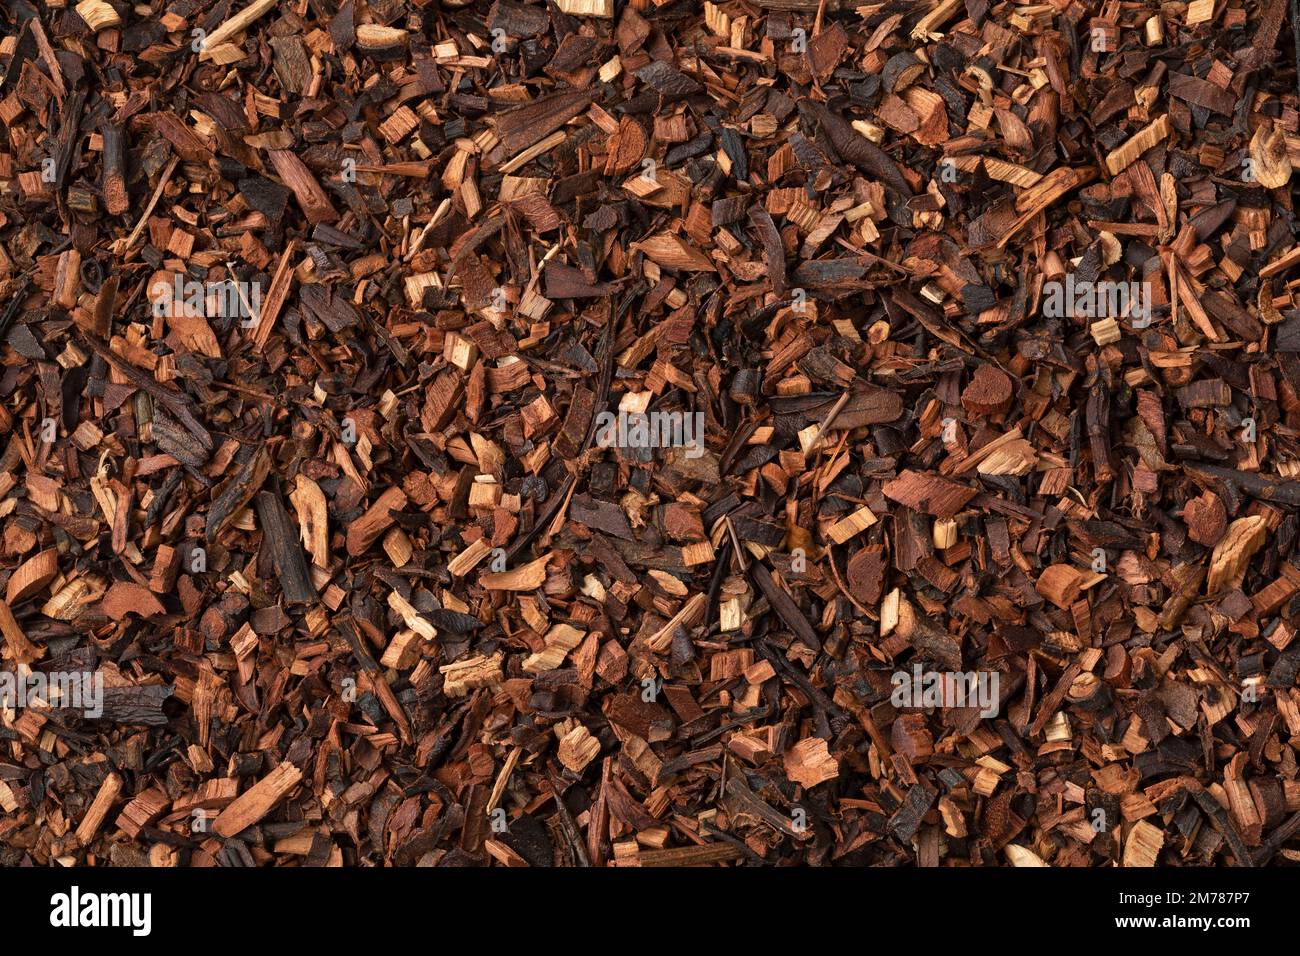 Dried Honeybush tea leaves from South Africa close up full frame as background Stock Photo